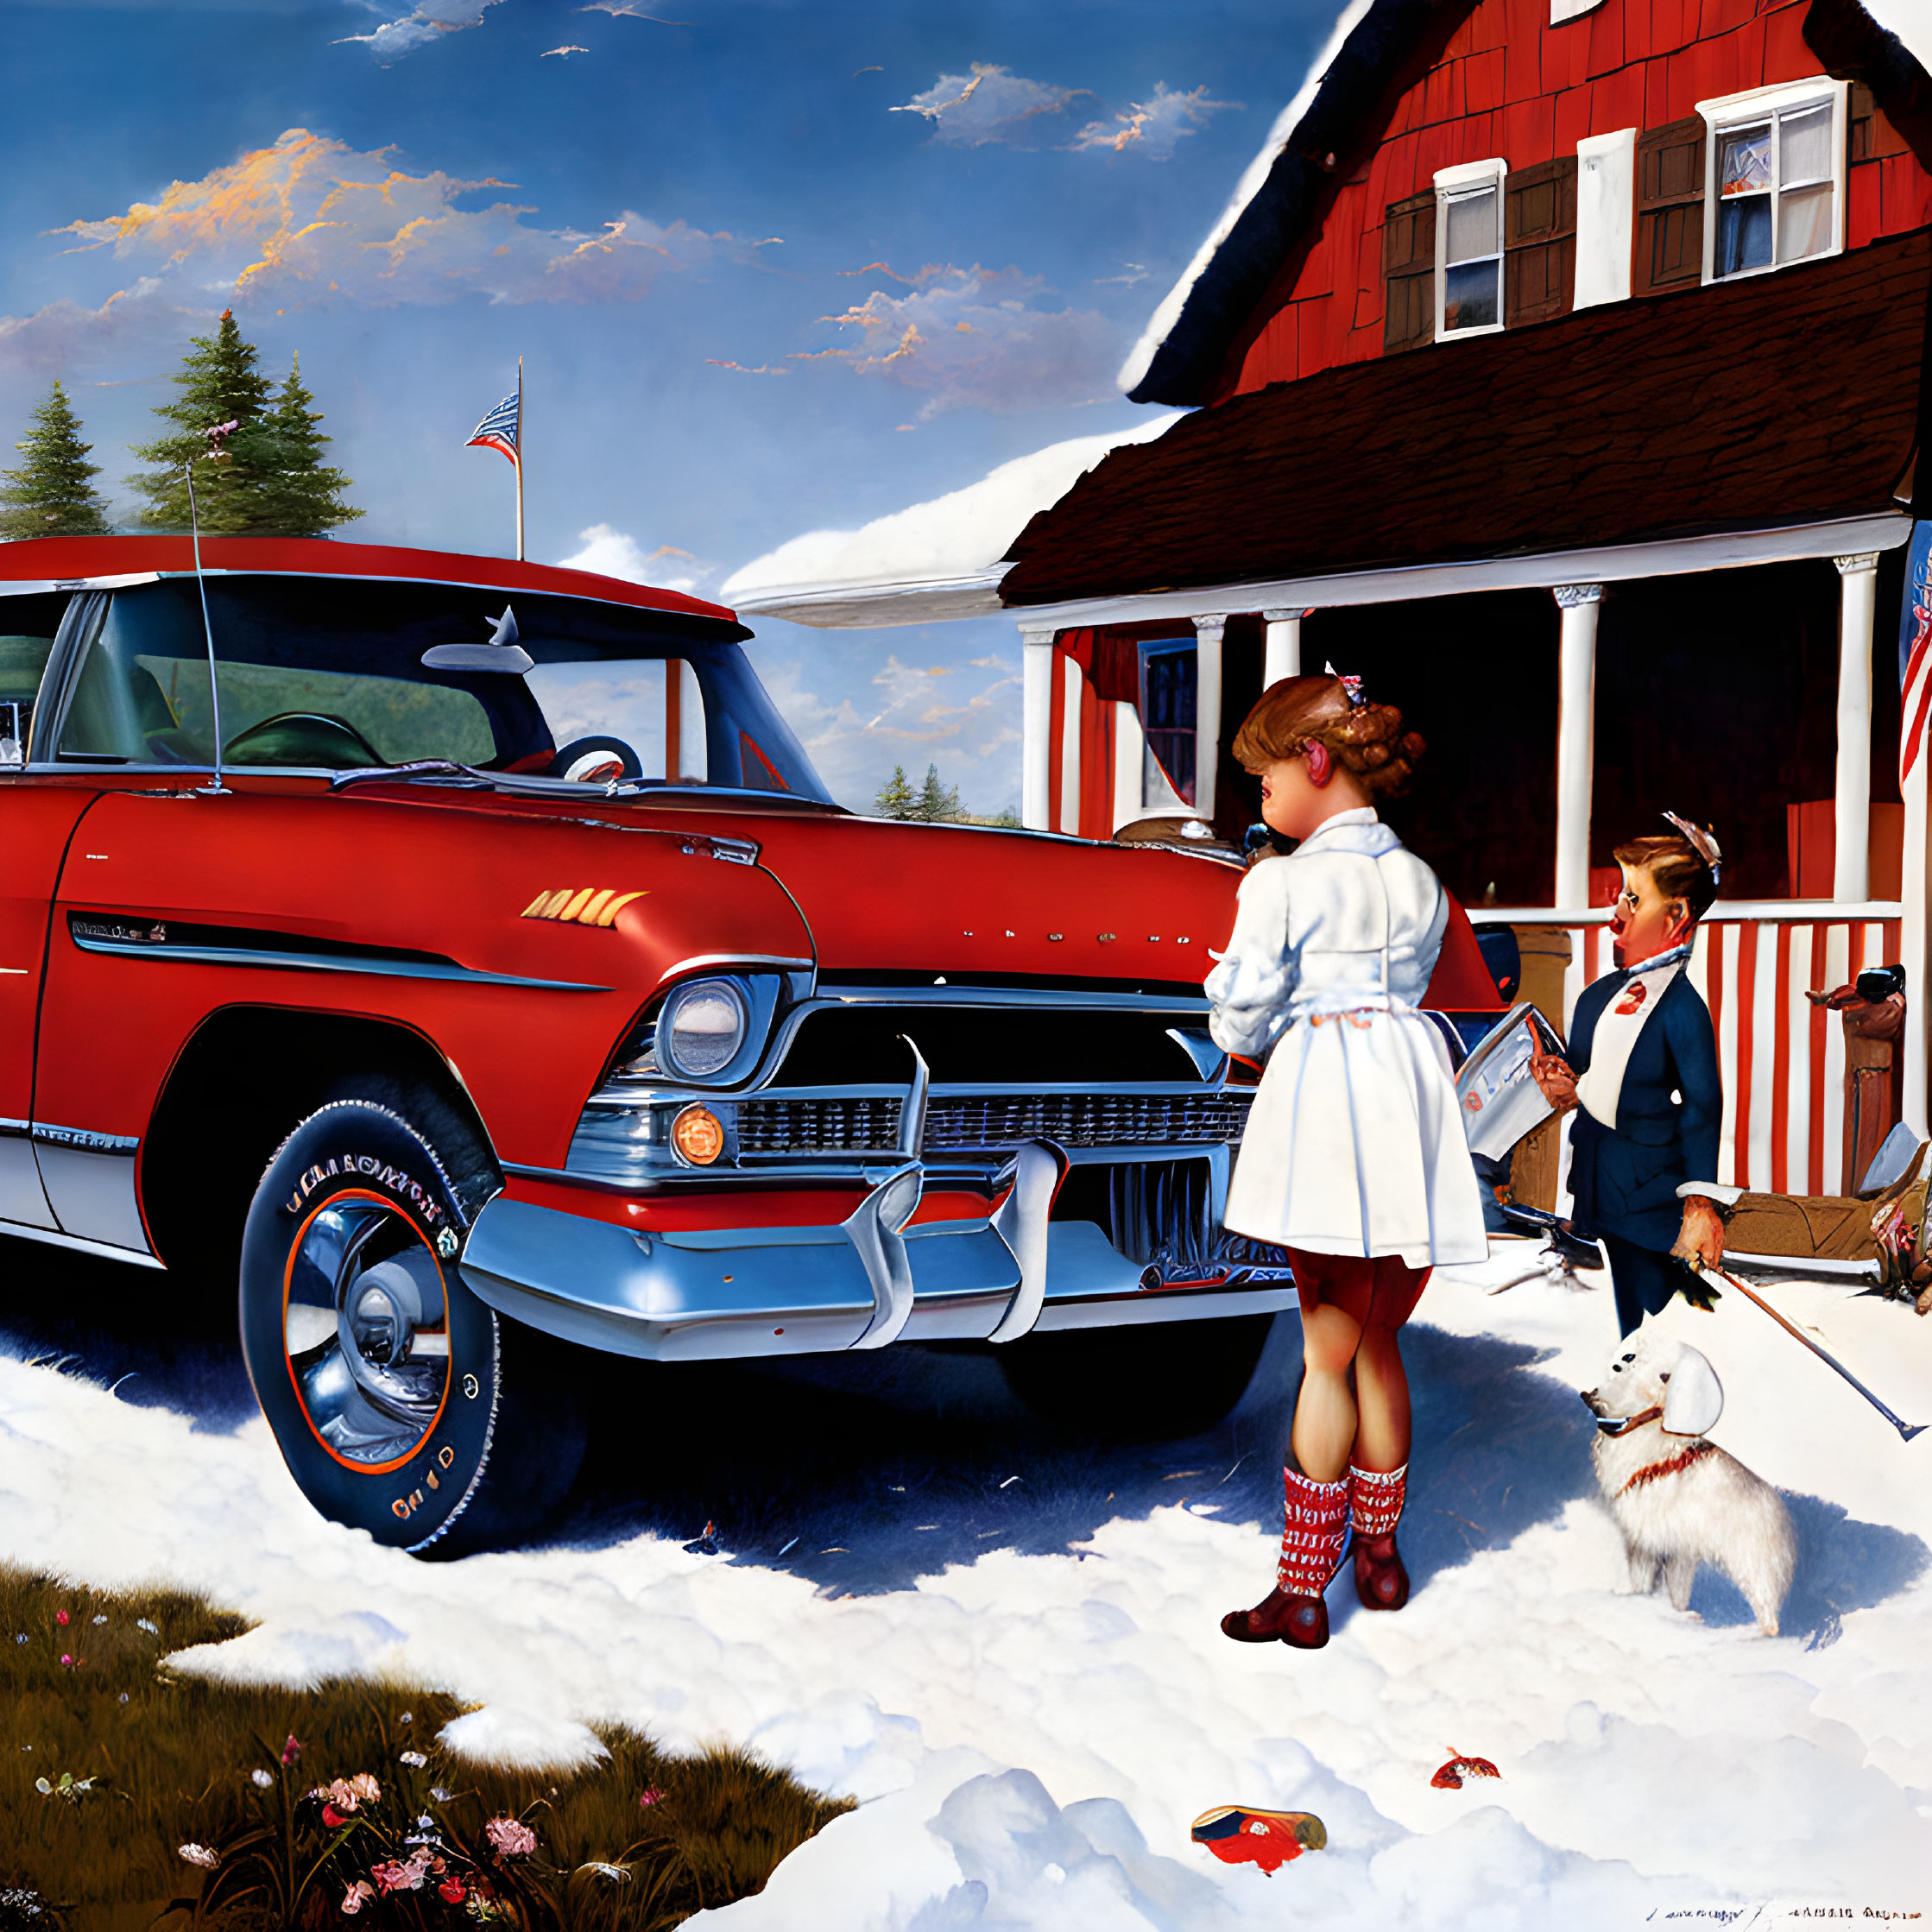 Vintage Red and White Car with Children and Dog by Red House